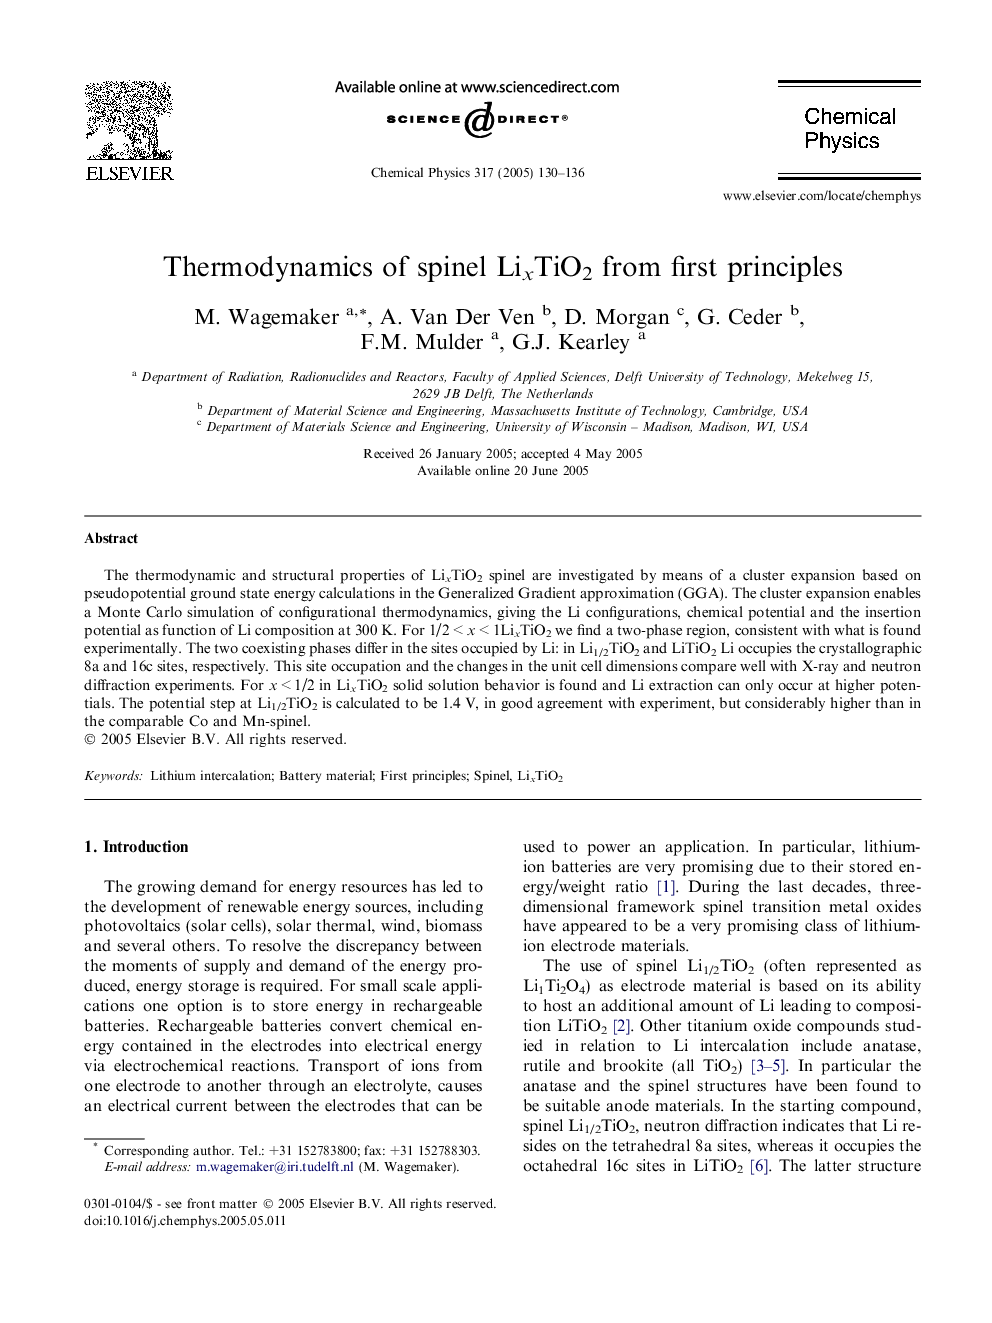 Thermodynamics of spinel LixTiO2 from first principles